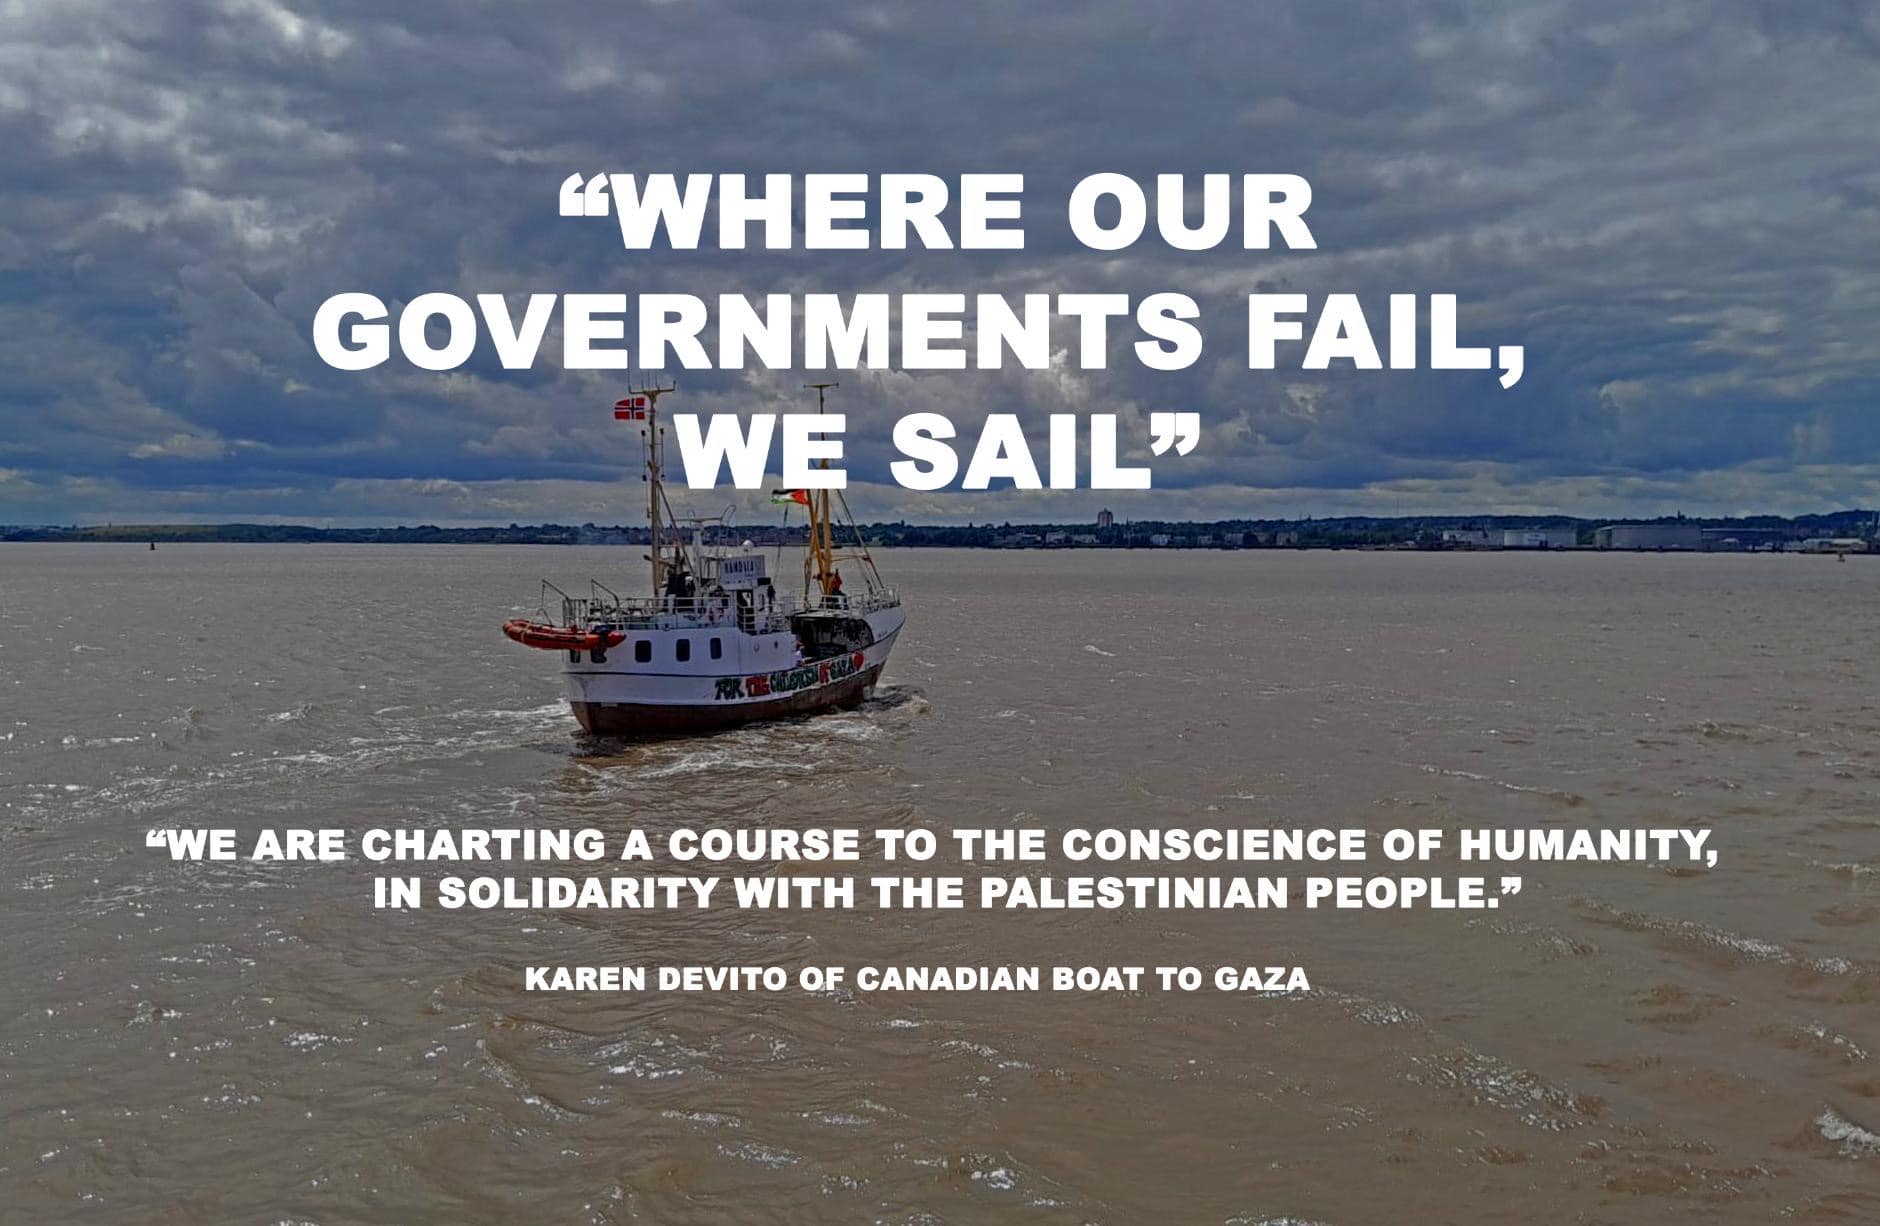 A boat sails in a bay with a quote overlaid that reads "where our governments fail, we sail" and "we are charting a course to the conscience of humanity, in solidarity with the Palestinian people." The quote is from Karen Devito of the Canadian boat to Gaza.